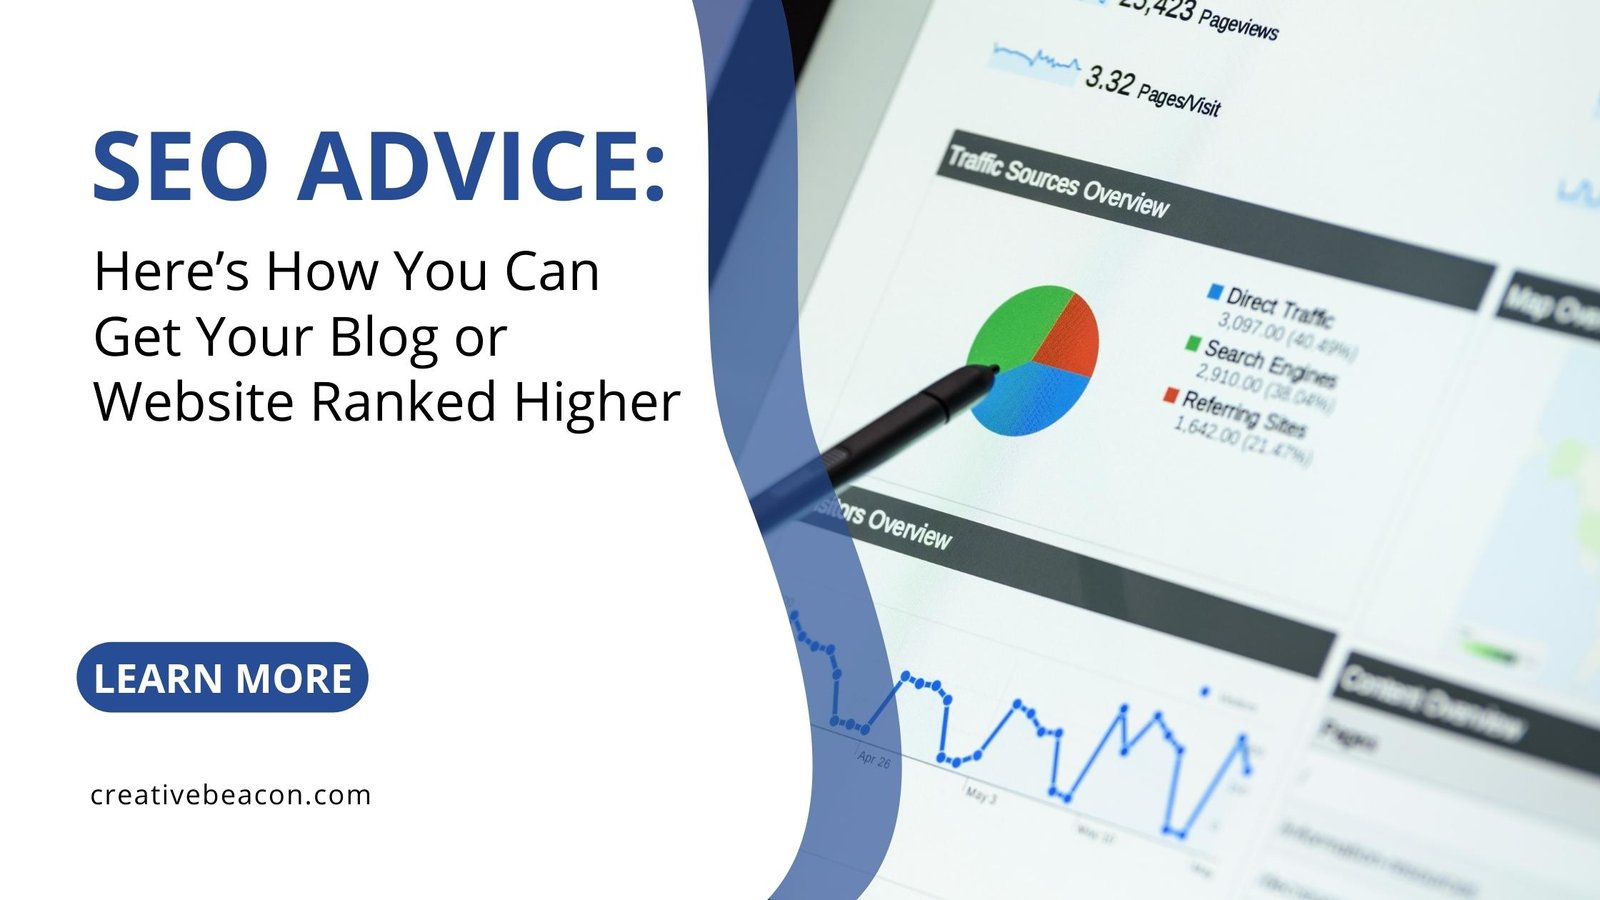 SEO Advice: Here’s How You Can Get Your Blog or Website Ranked Higher